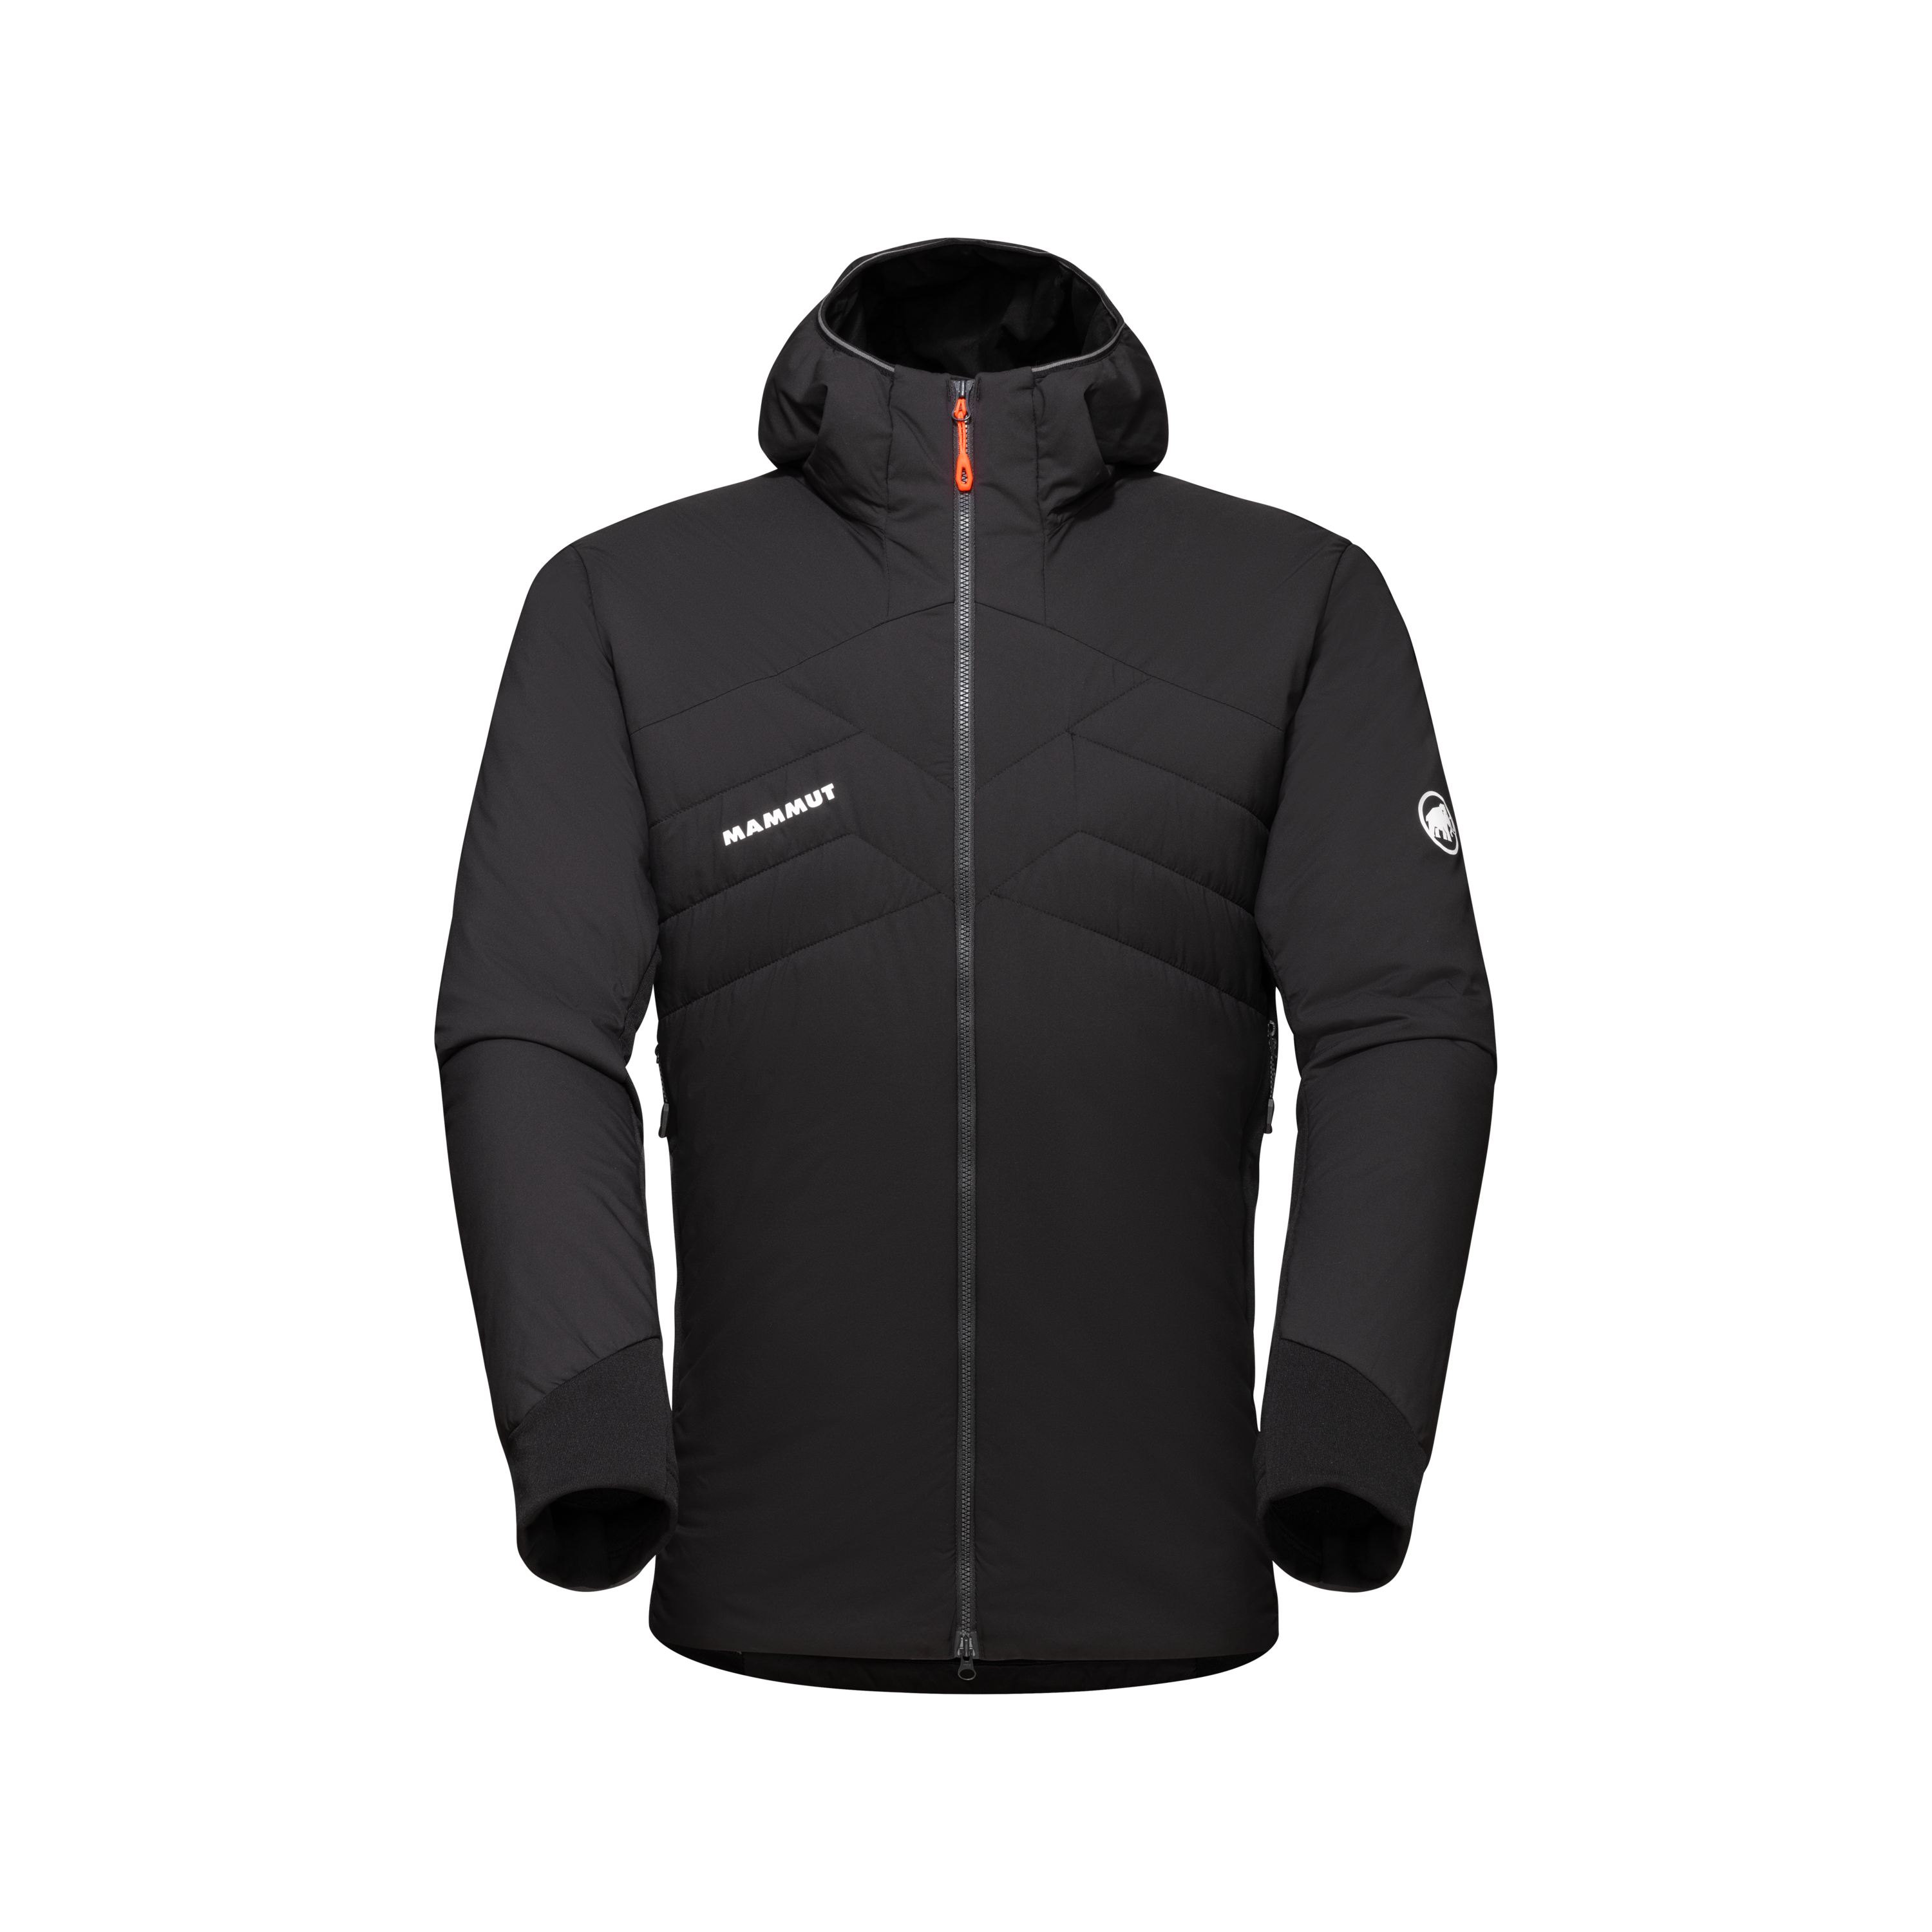 Outdoor Jackets and Vests | Mammut